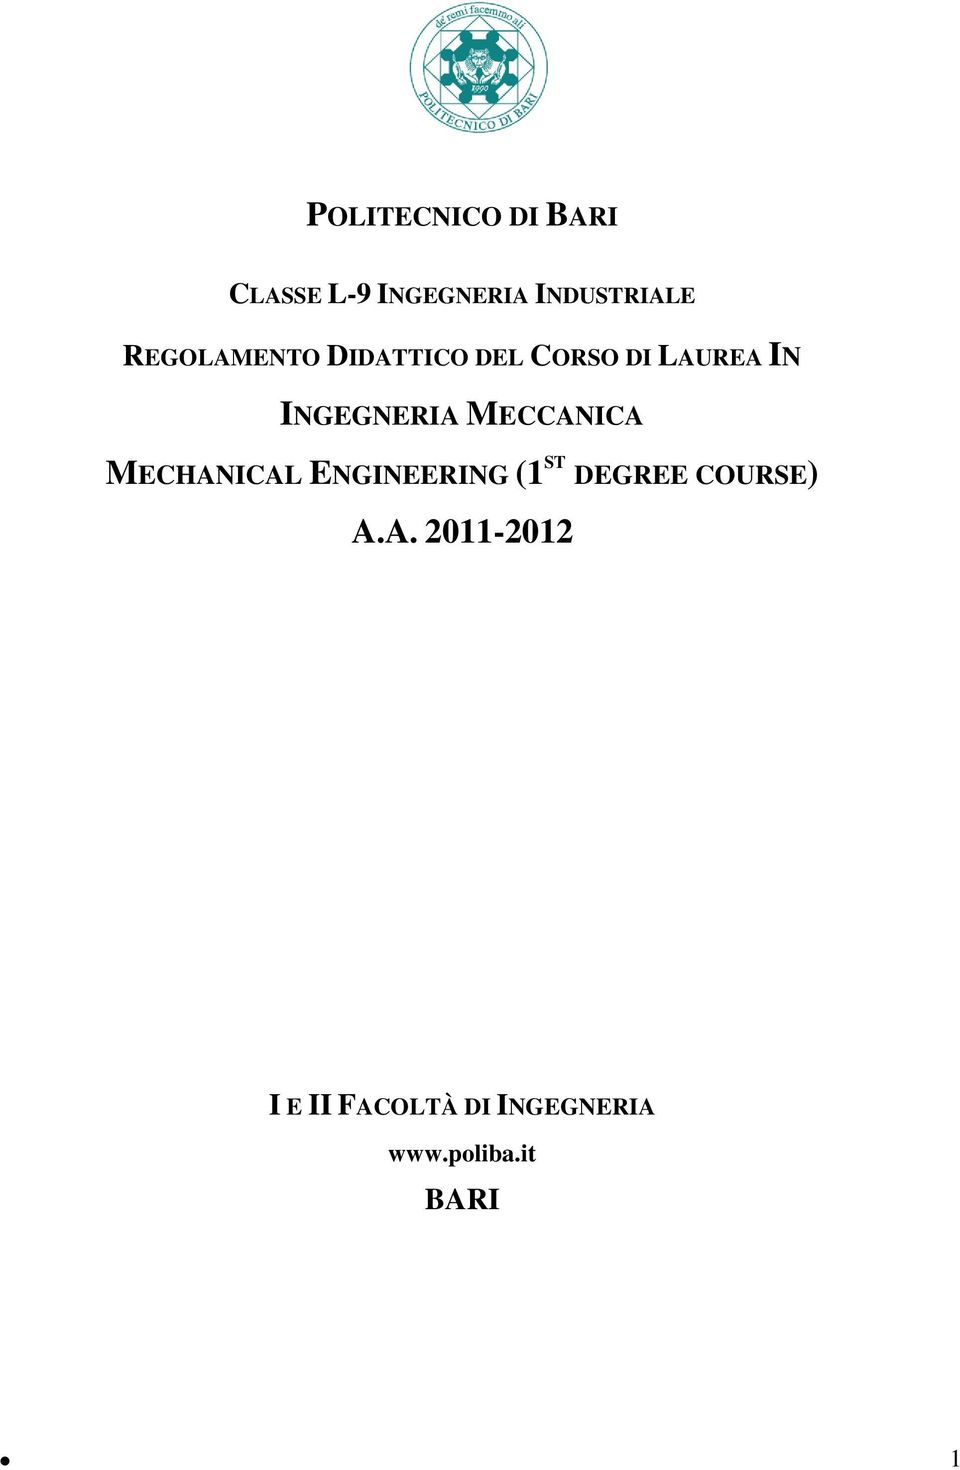 MECCANICA MECHANICAL ENGINEERING (1 ST DEGREE COURSE) A.